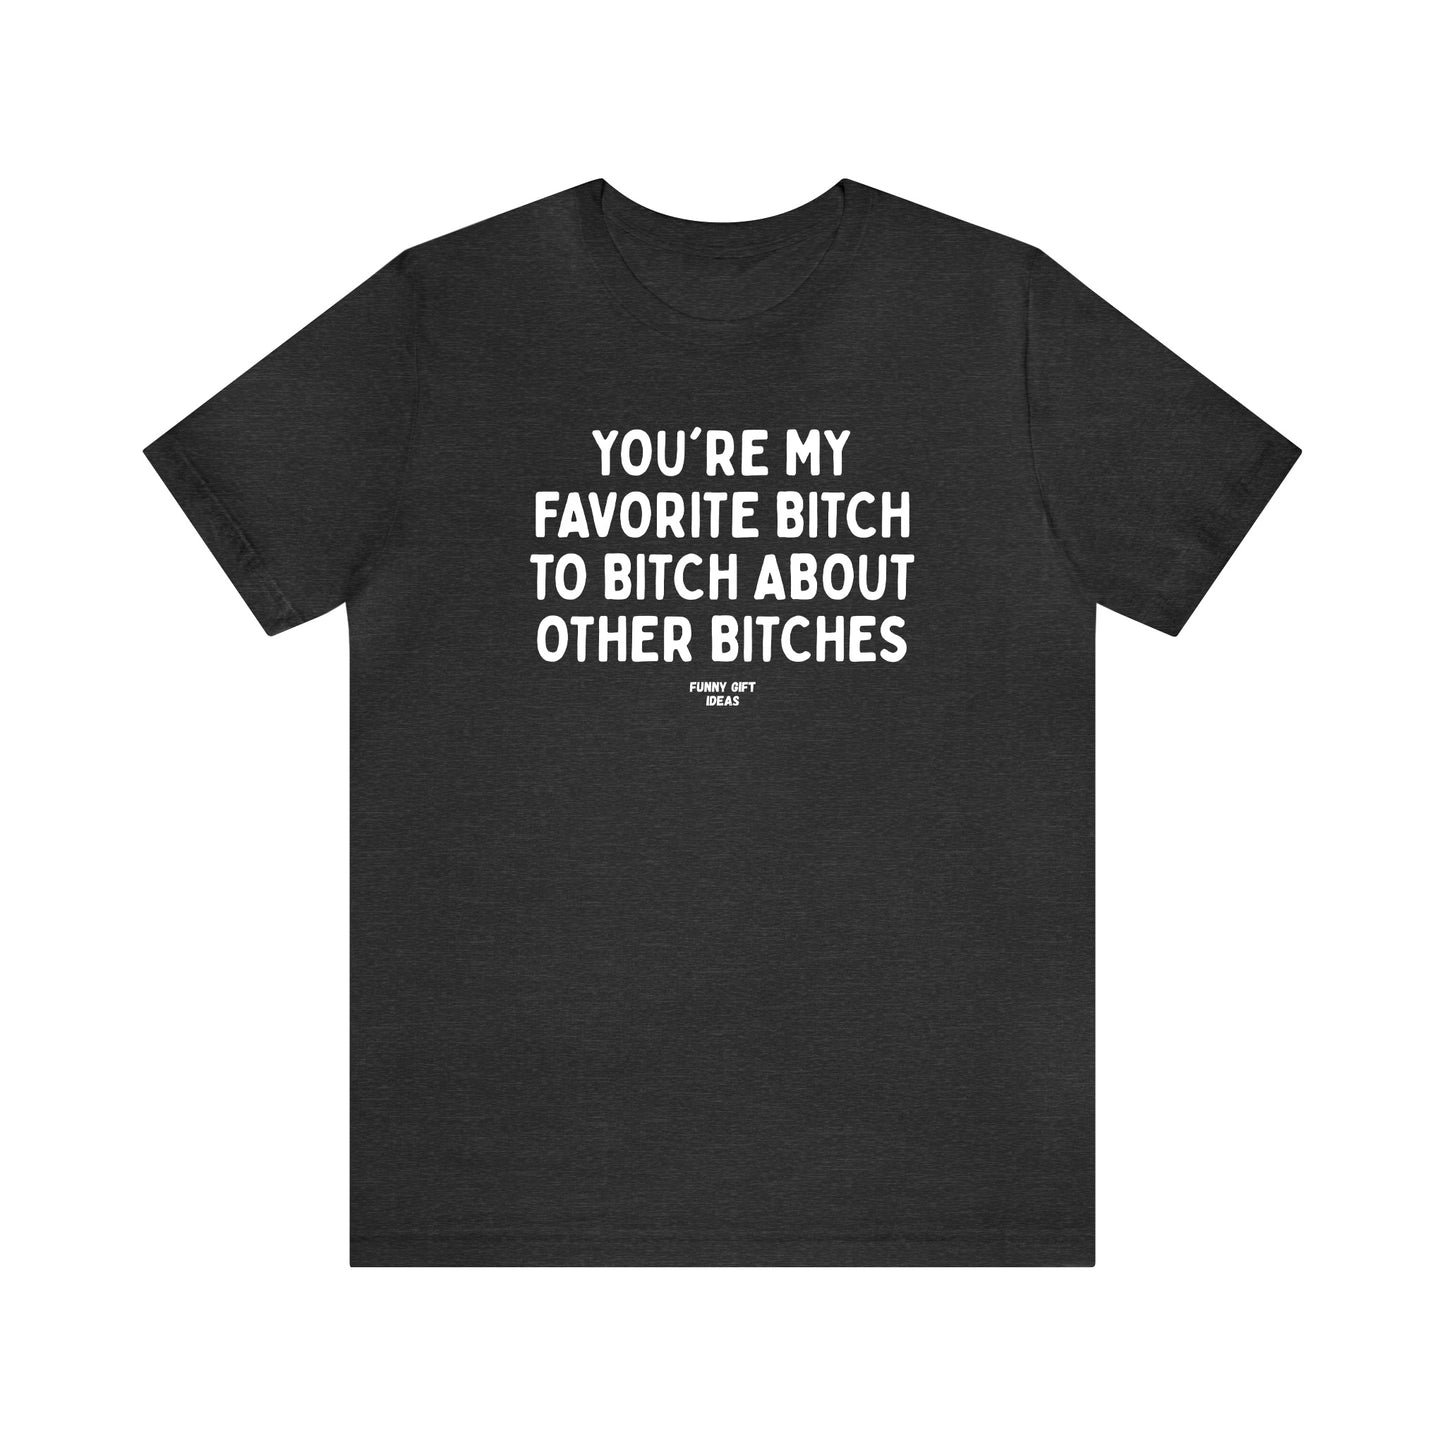 Funny Shirts for Women - You're My Favorite Bitch to Bitch About Other Bitches - Women's T Shirts